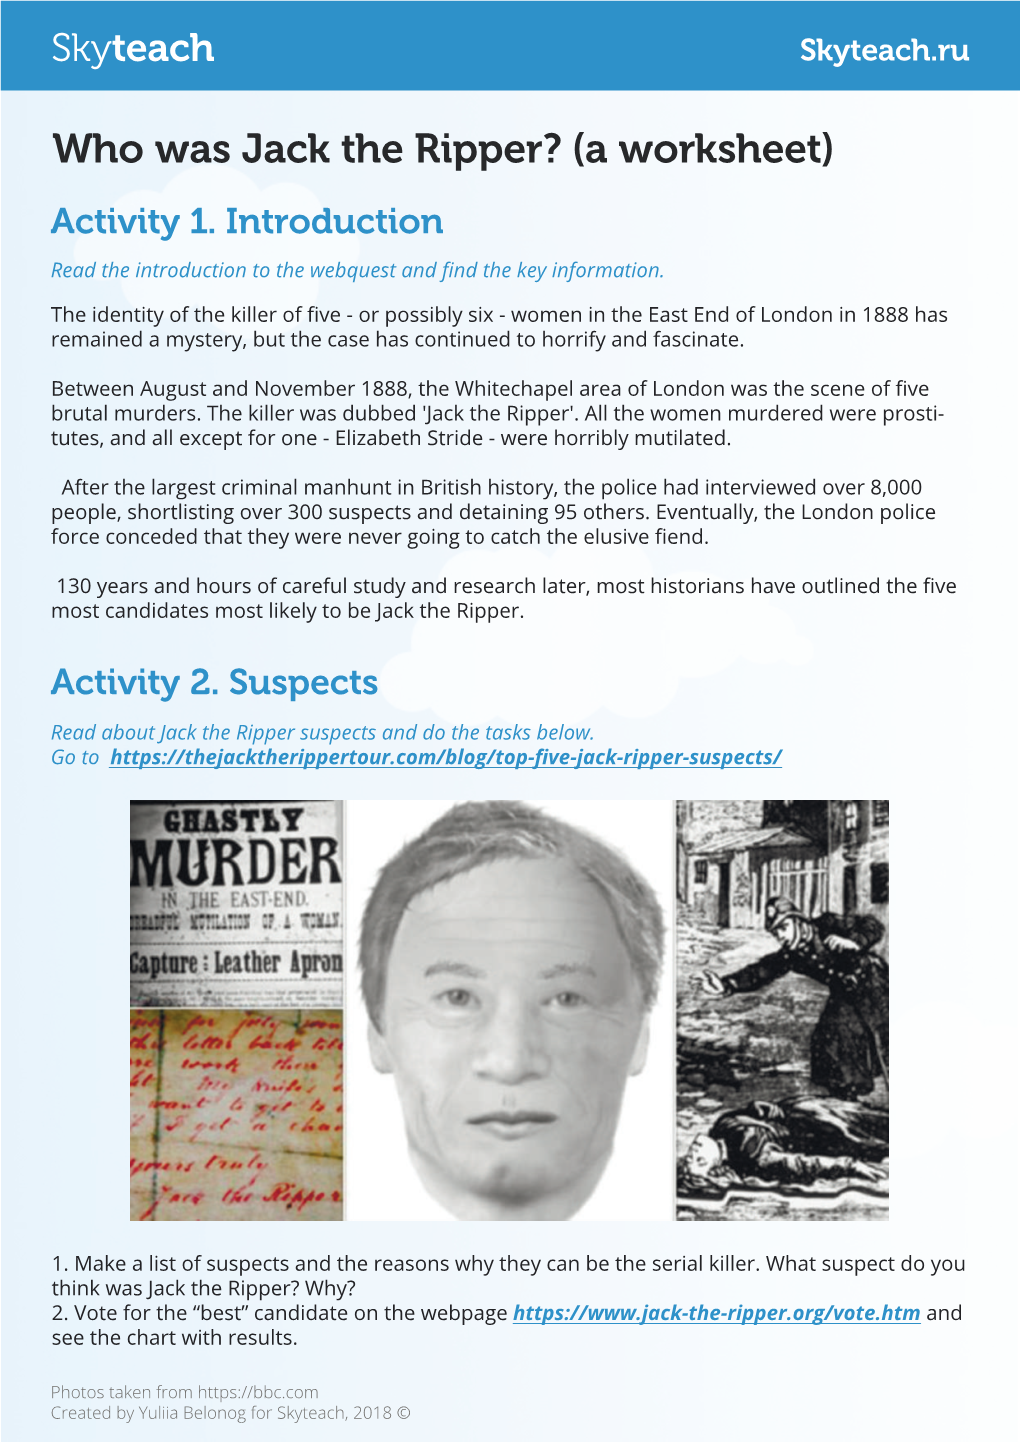 Who Was Jack the Ripper?(A Worksheet)